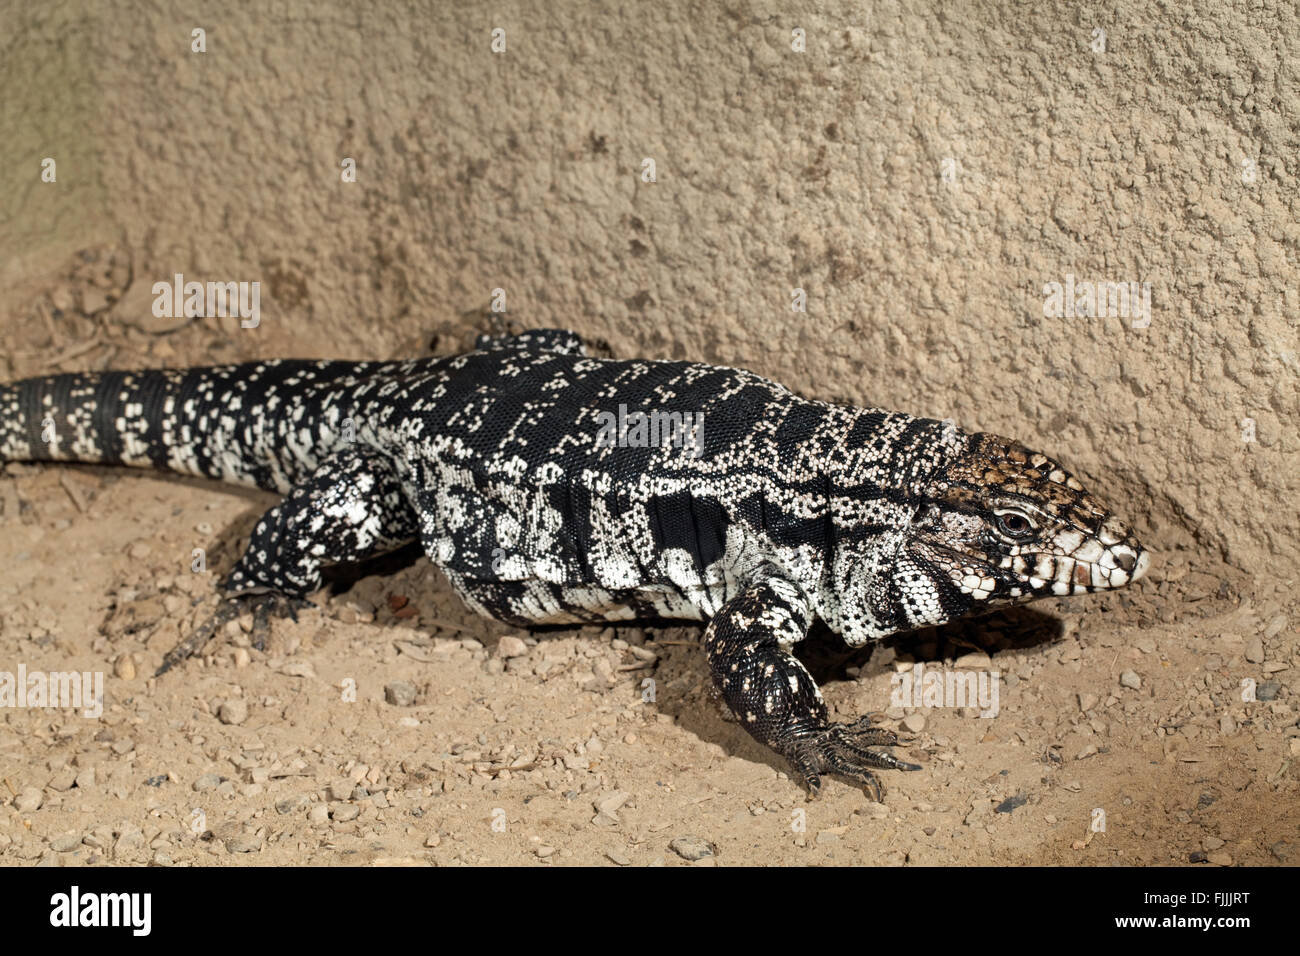 Black and White Tegu (Tupinambis merianae). A large lizard found in South and Central America. Introduced, invasive in Florida, Stock Photo